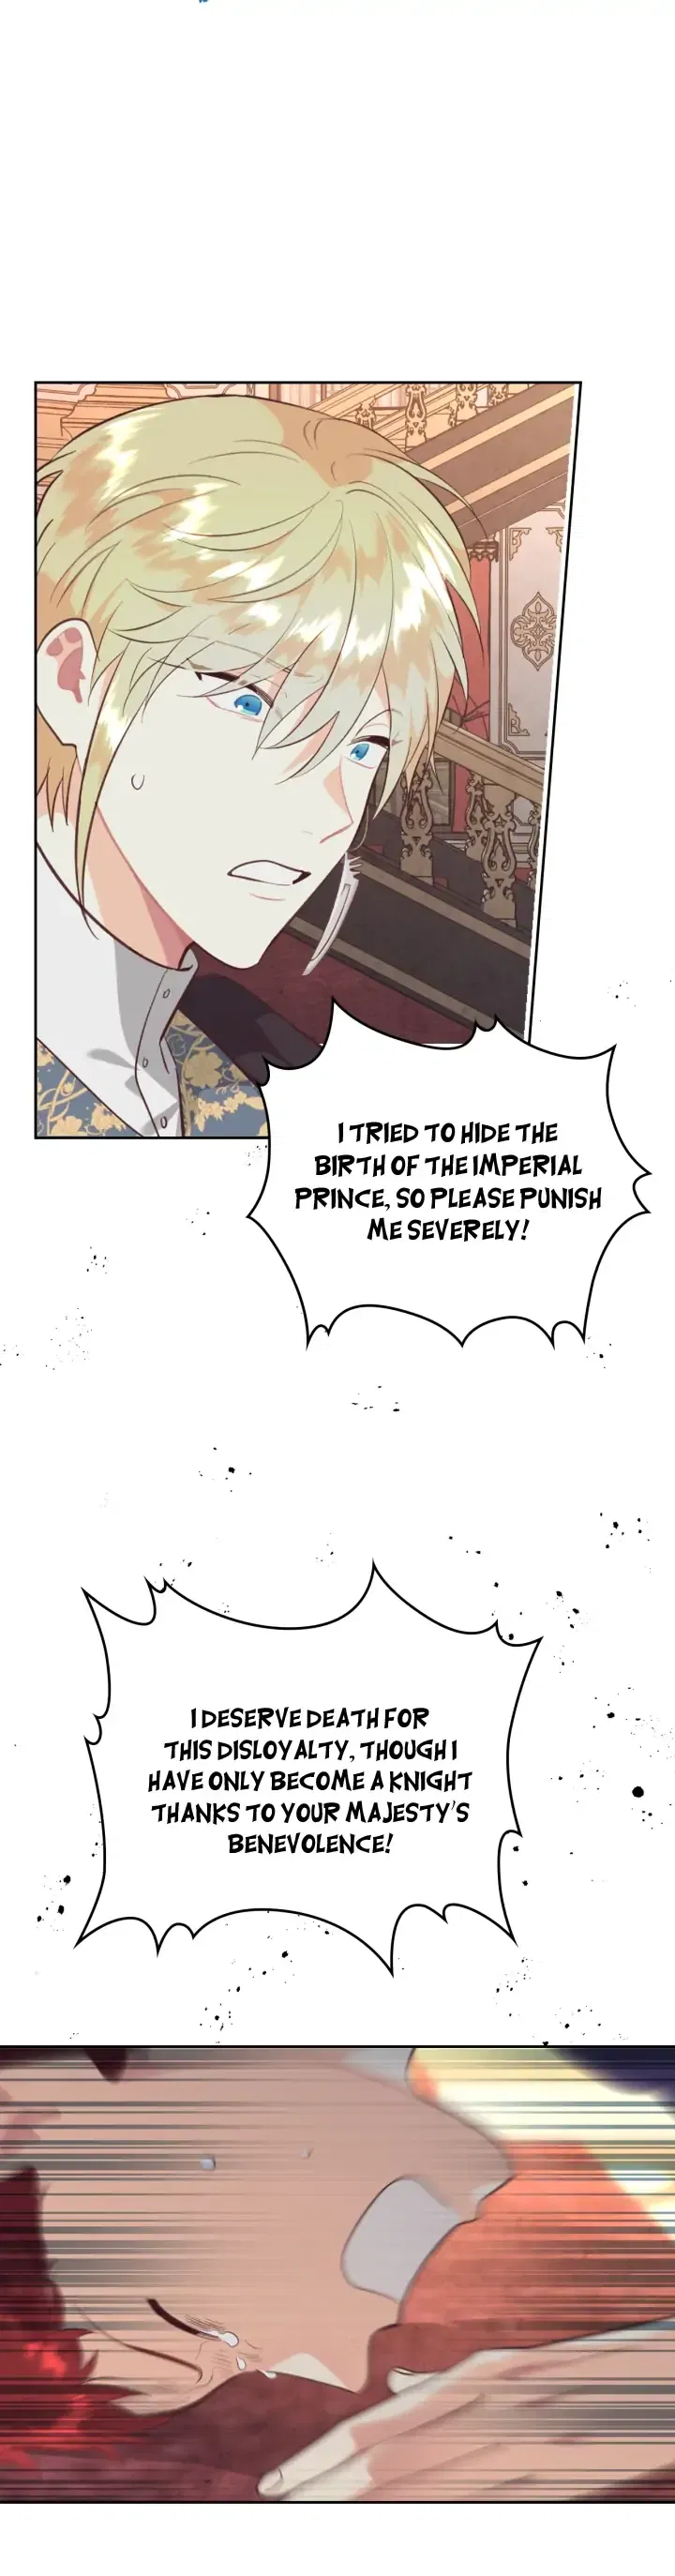 Emperor And The Female Knight Chapter 158 page 9